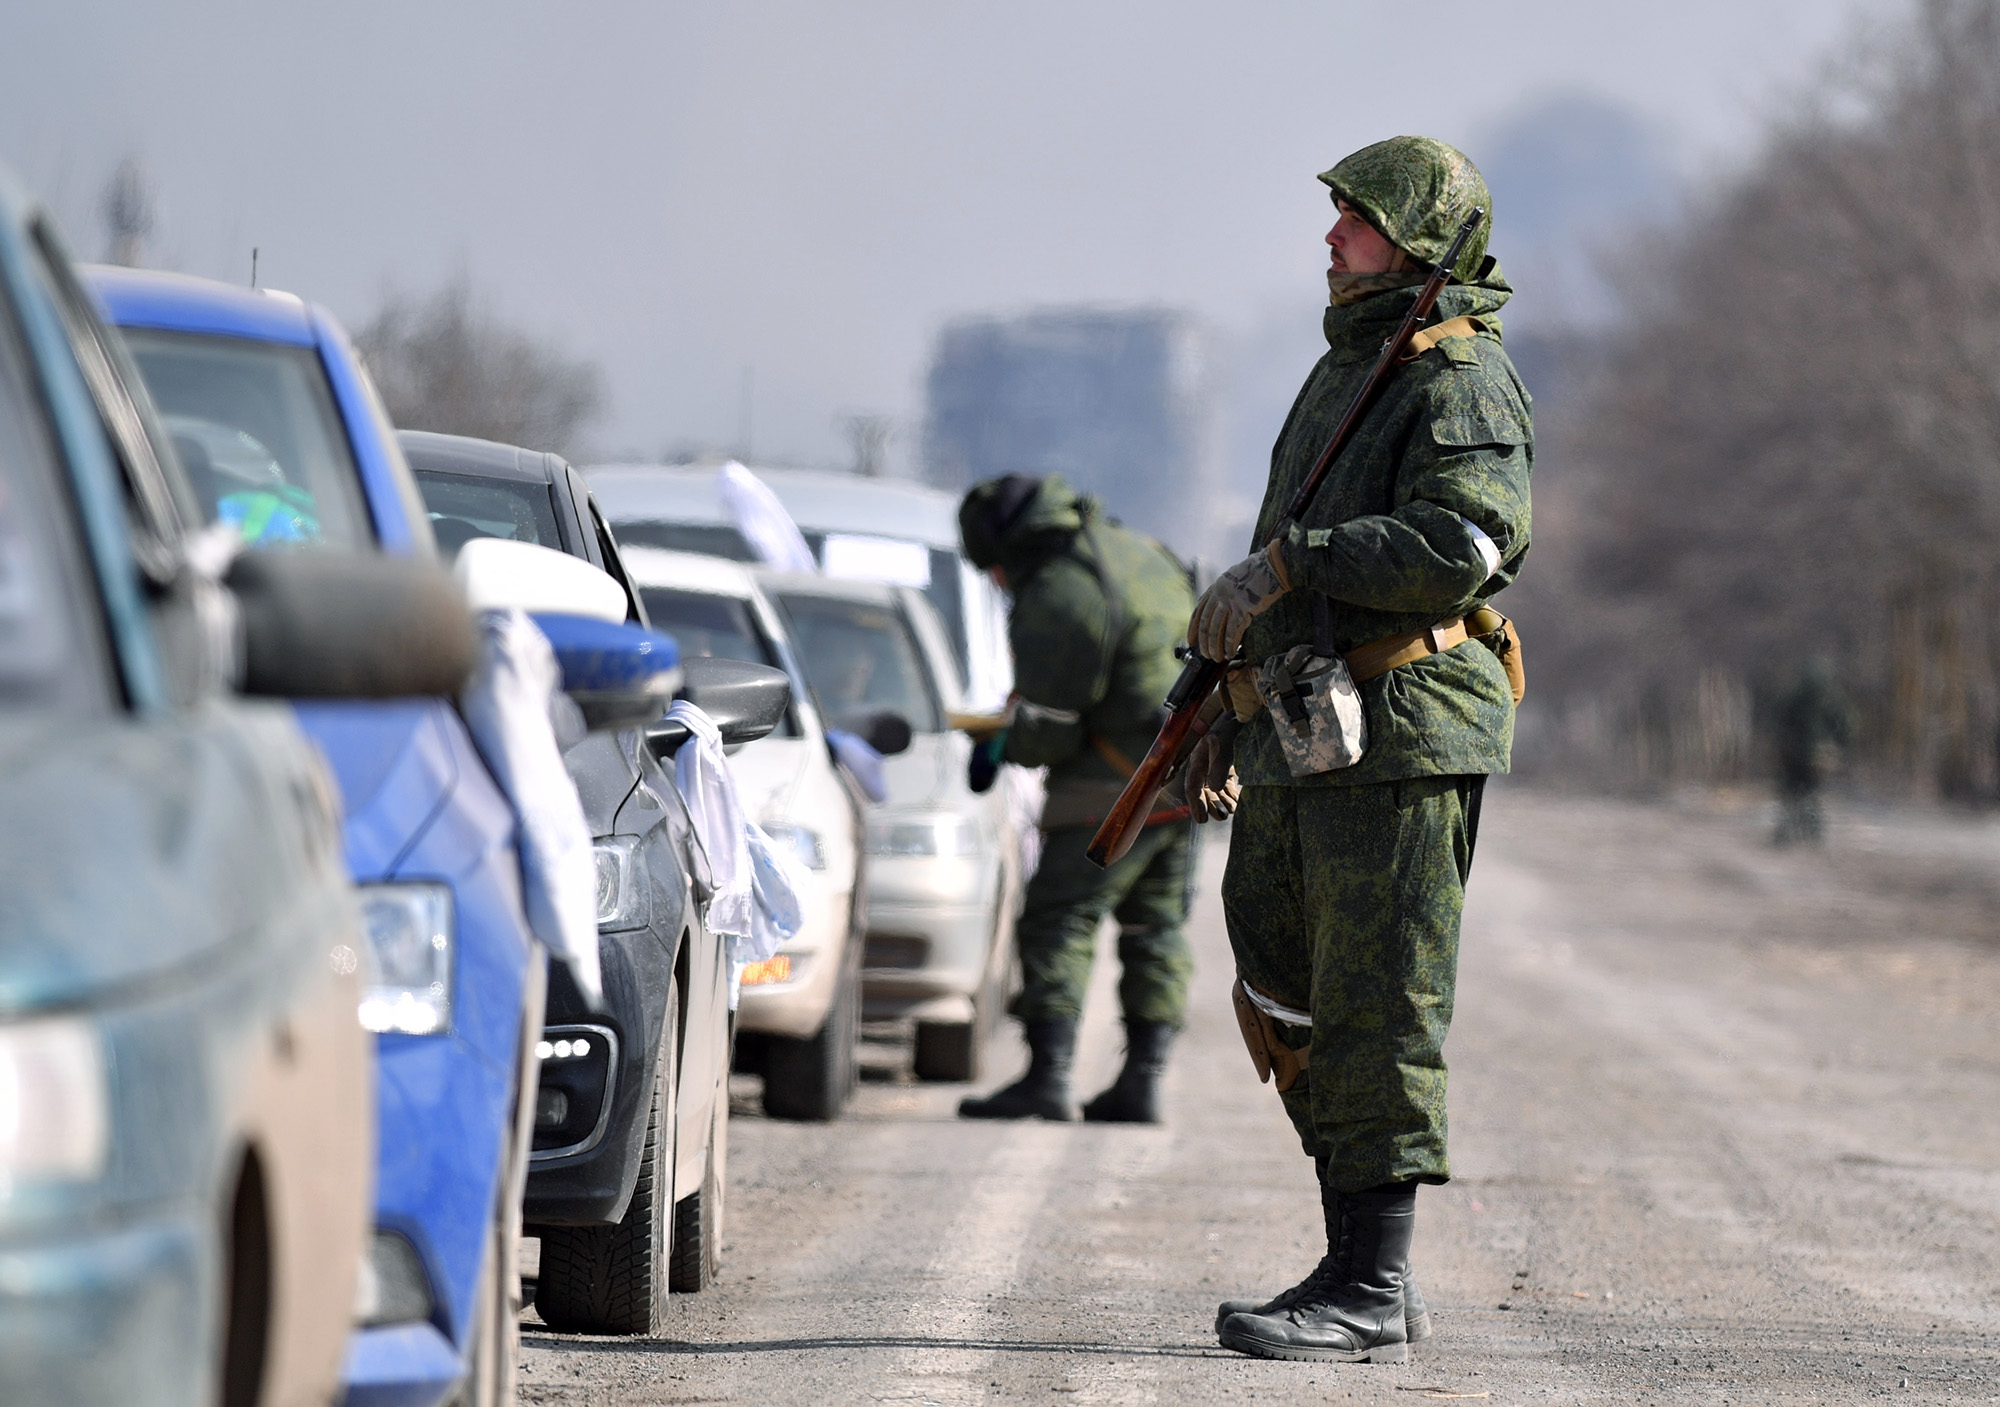 Servicemen of the self-declared DPR People's Militia check the documents of residents leaving Mariupol, Ukraine, on March 16.